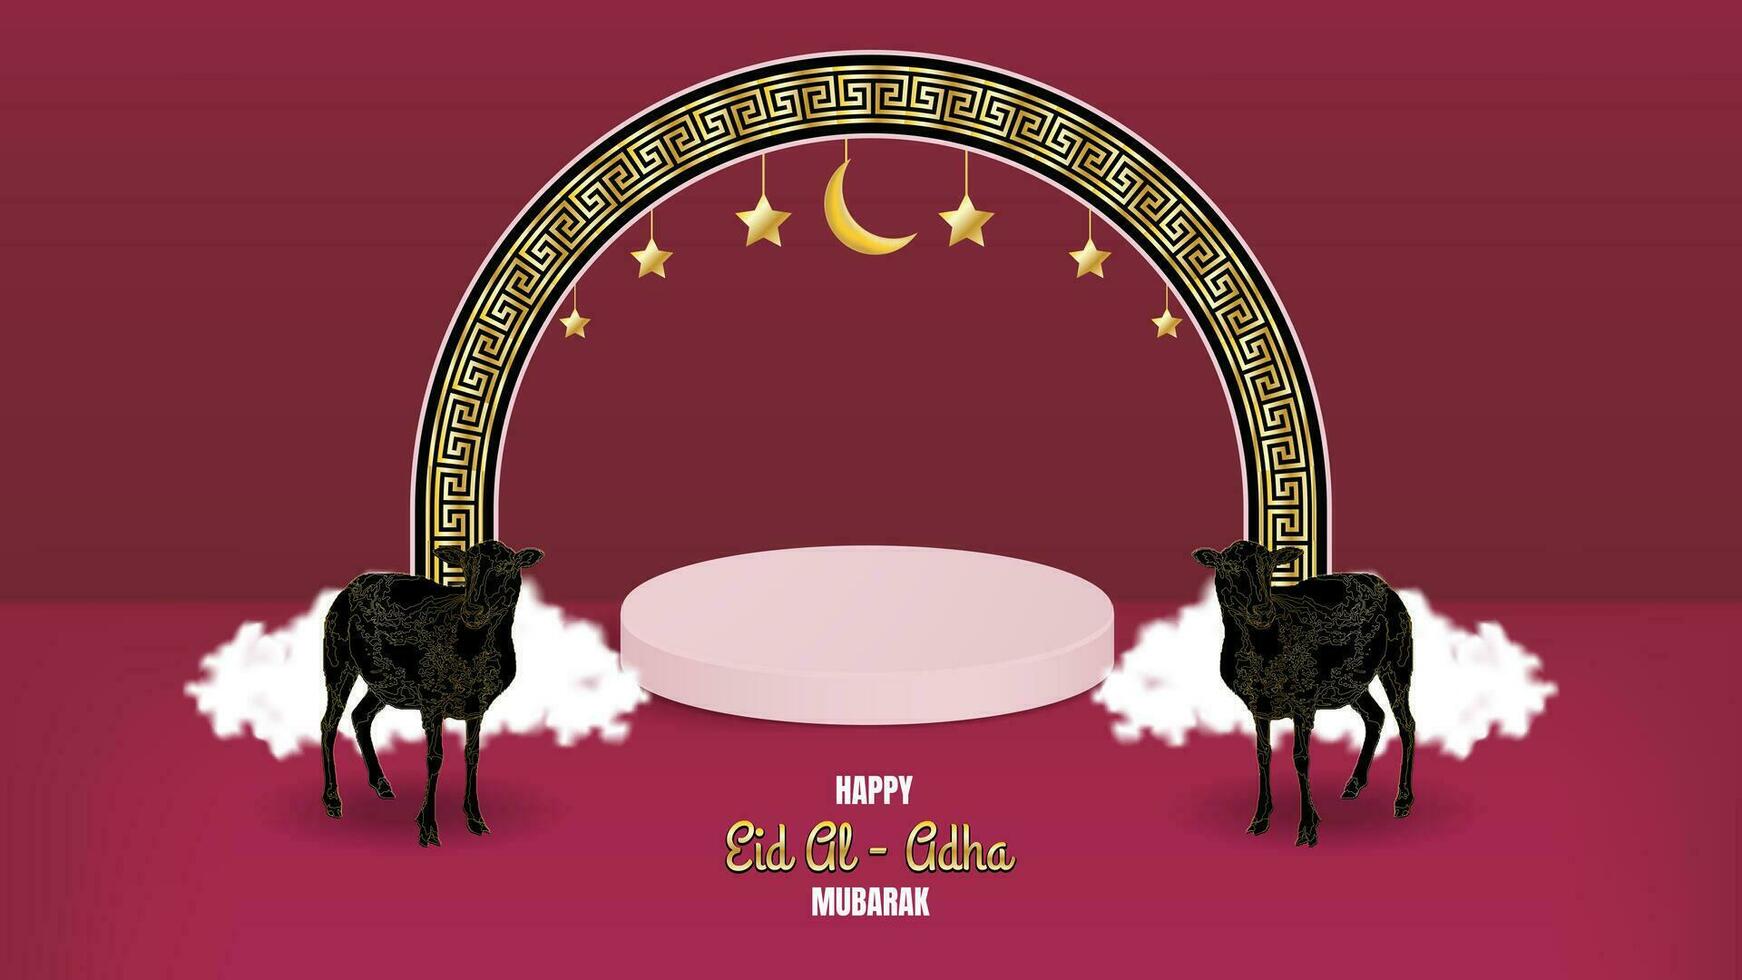 Eid Al Adha Islamic Template the celebration of Muslim, With 3d podium, goat and gold ornament. vector